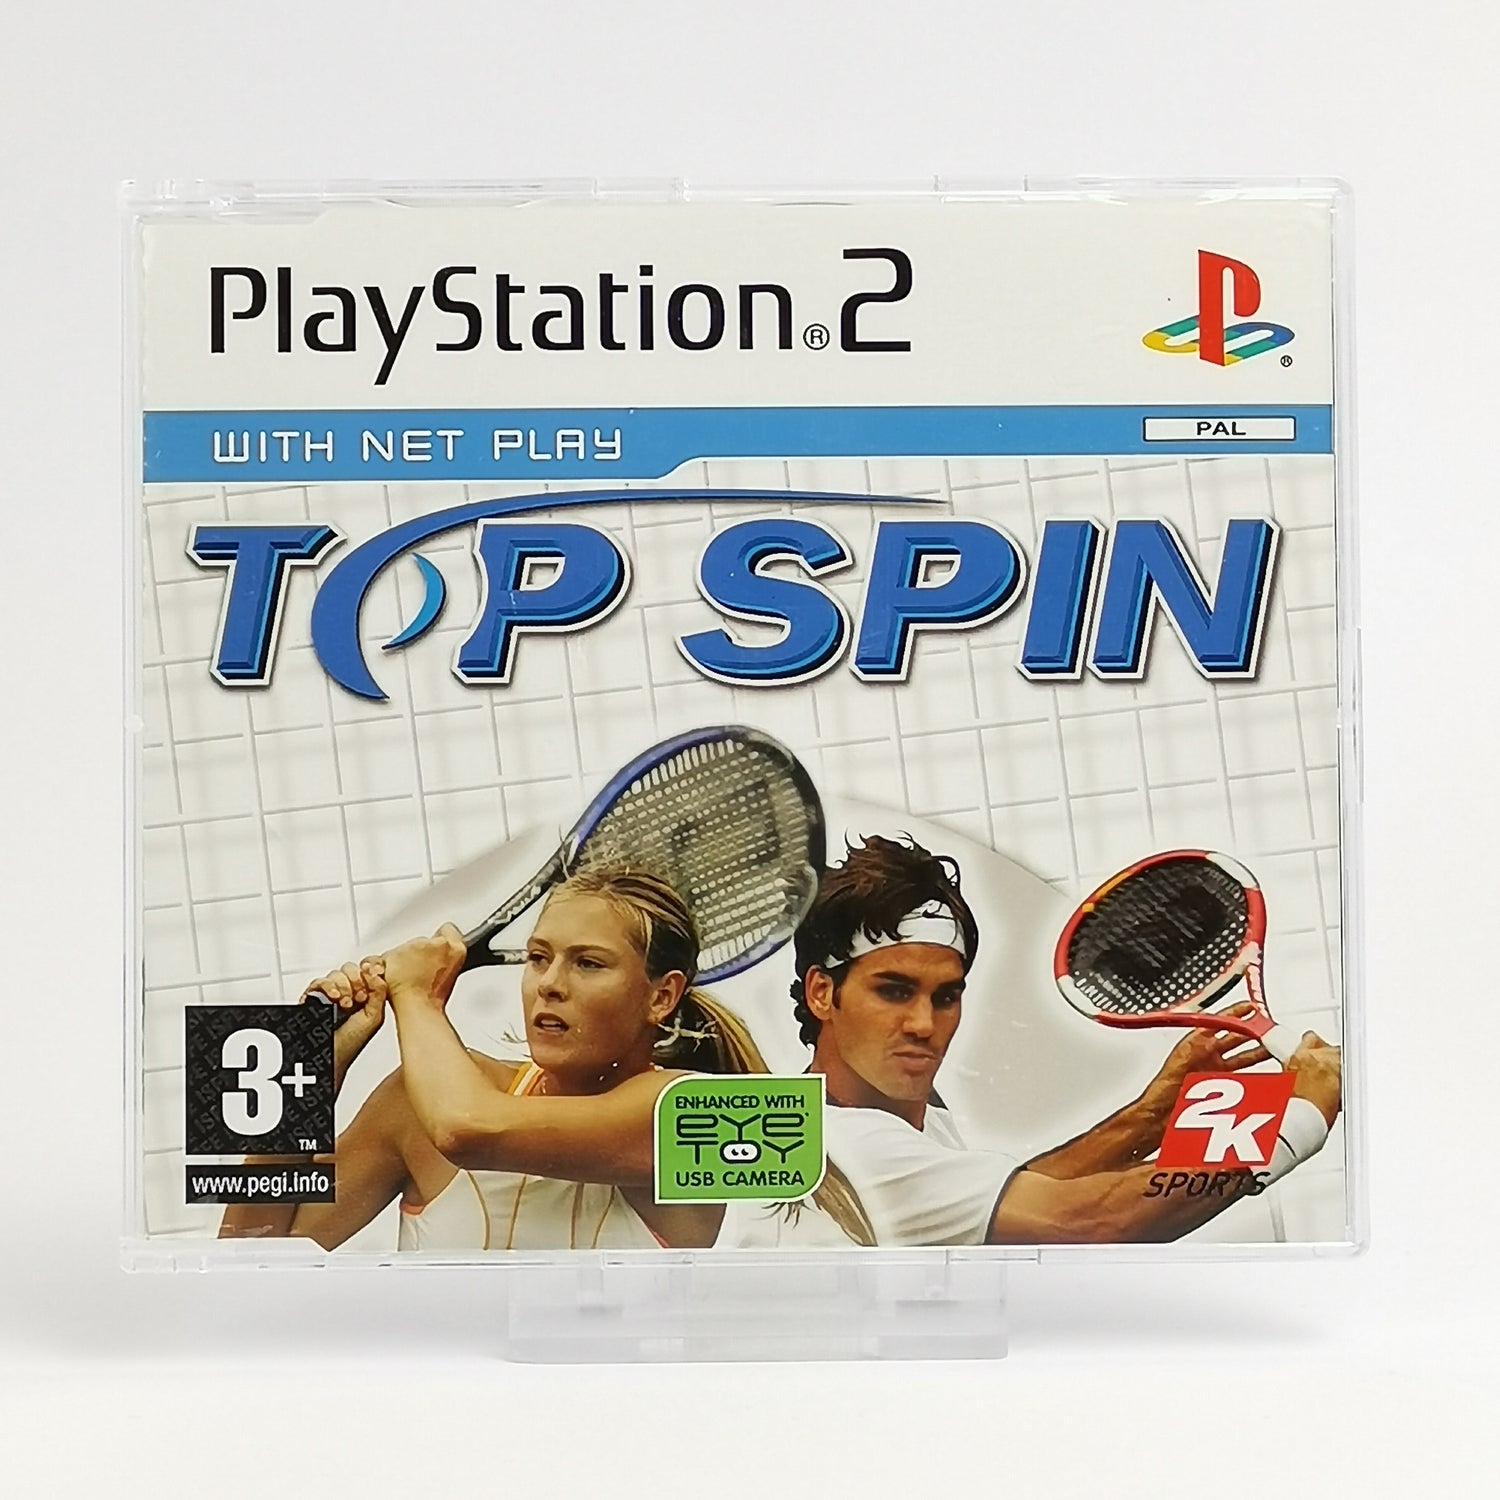 Sony Playstation 2 Promo Game: Top Spin - Full Game Full Version | Original packaging PAL PS2